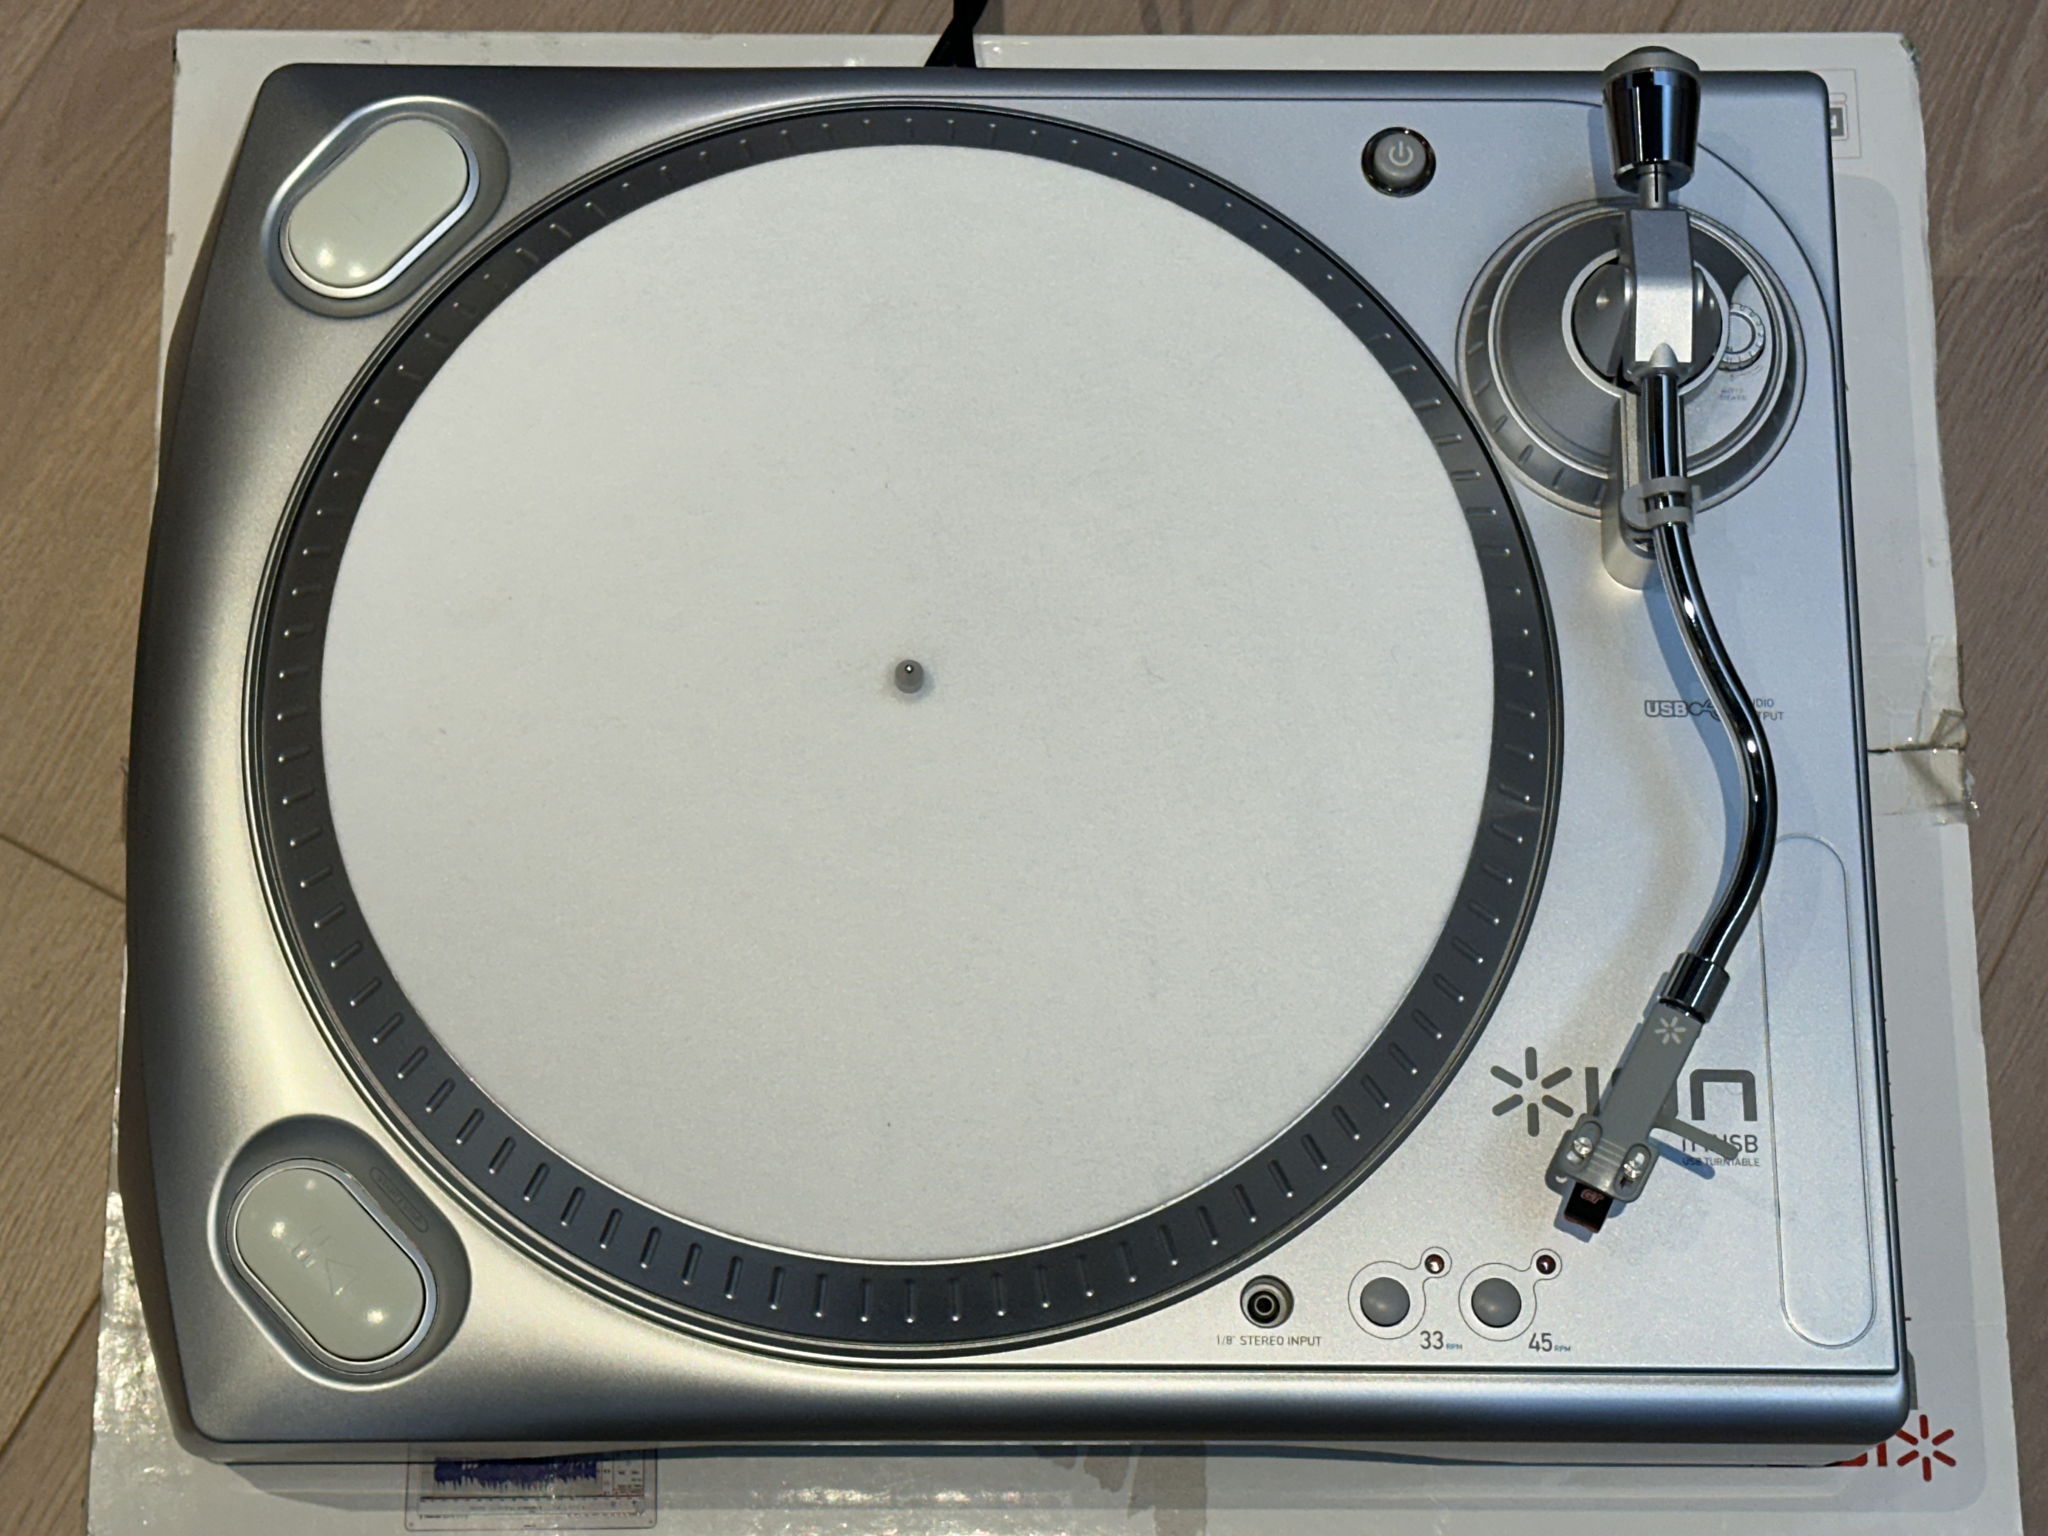 Ion USB Turntable iTTUSB Vinyl Record Player EXCELLENT 4